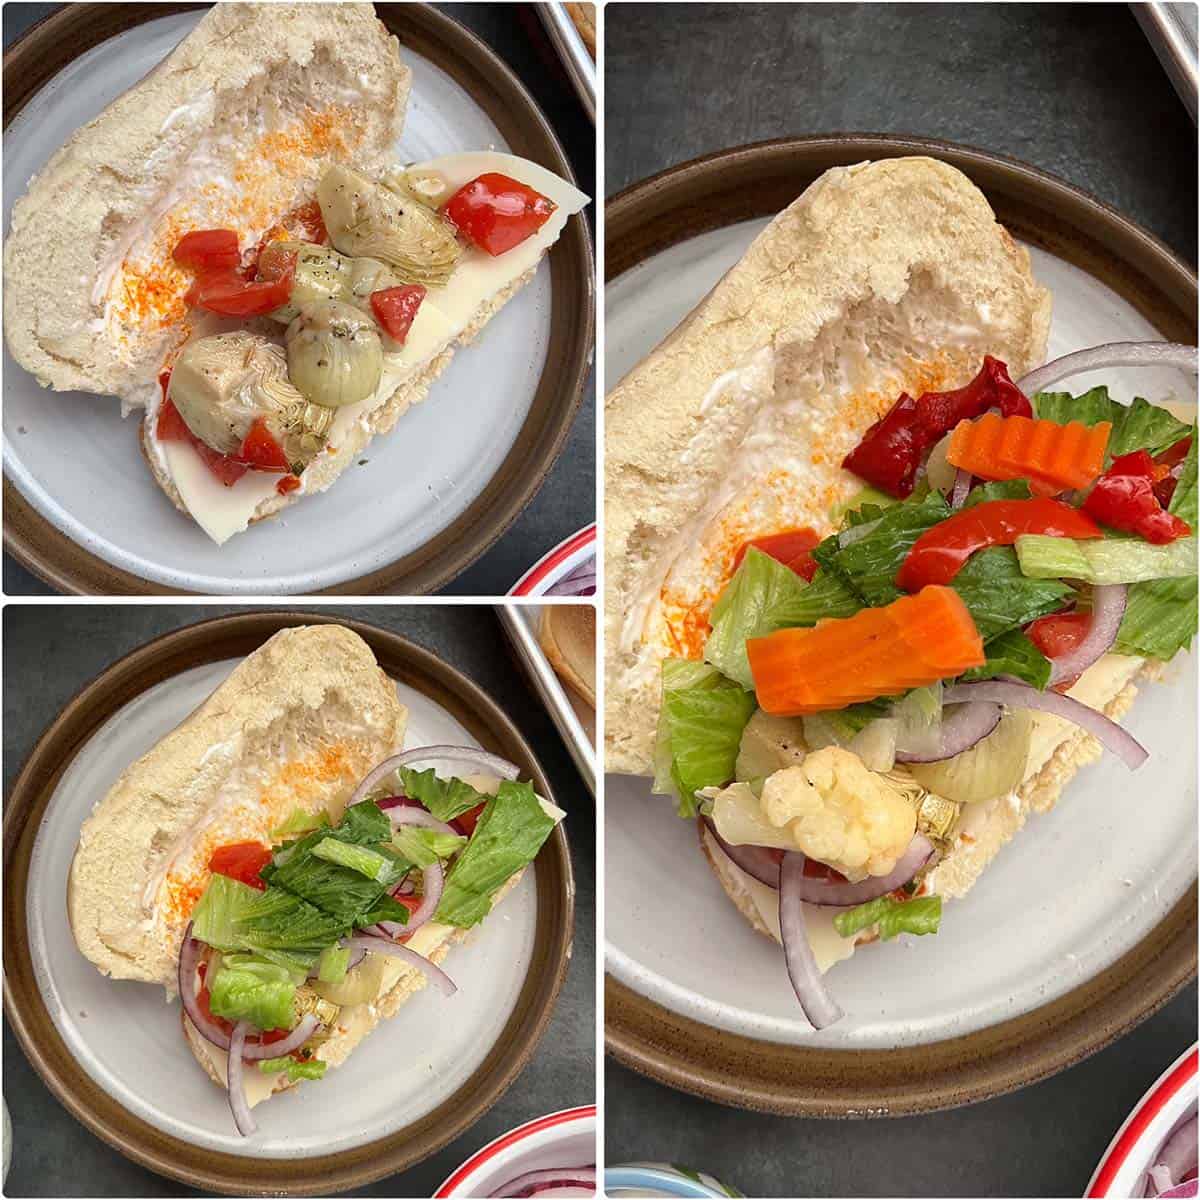 3 panel photo showing the addition of vegetables to the sandwich.